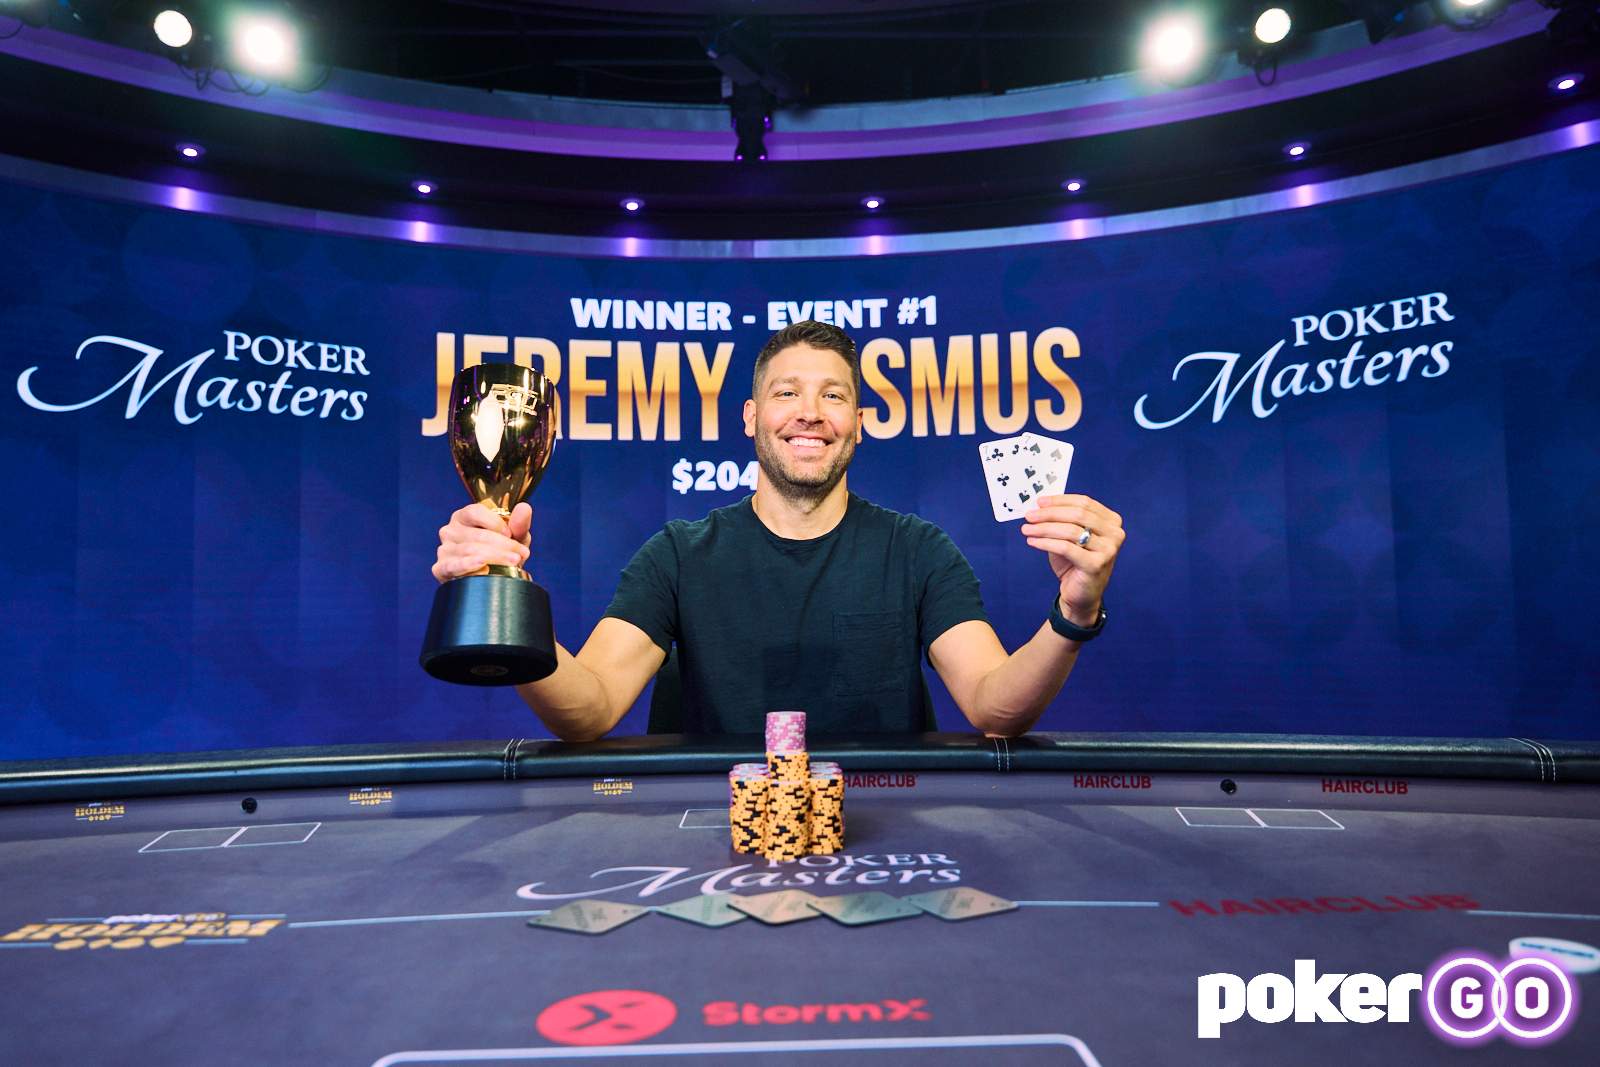 Jeremy Ausmus Wins 2022 Poker Masters Event #1 for $204,000